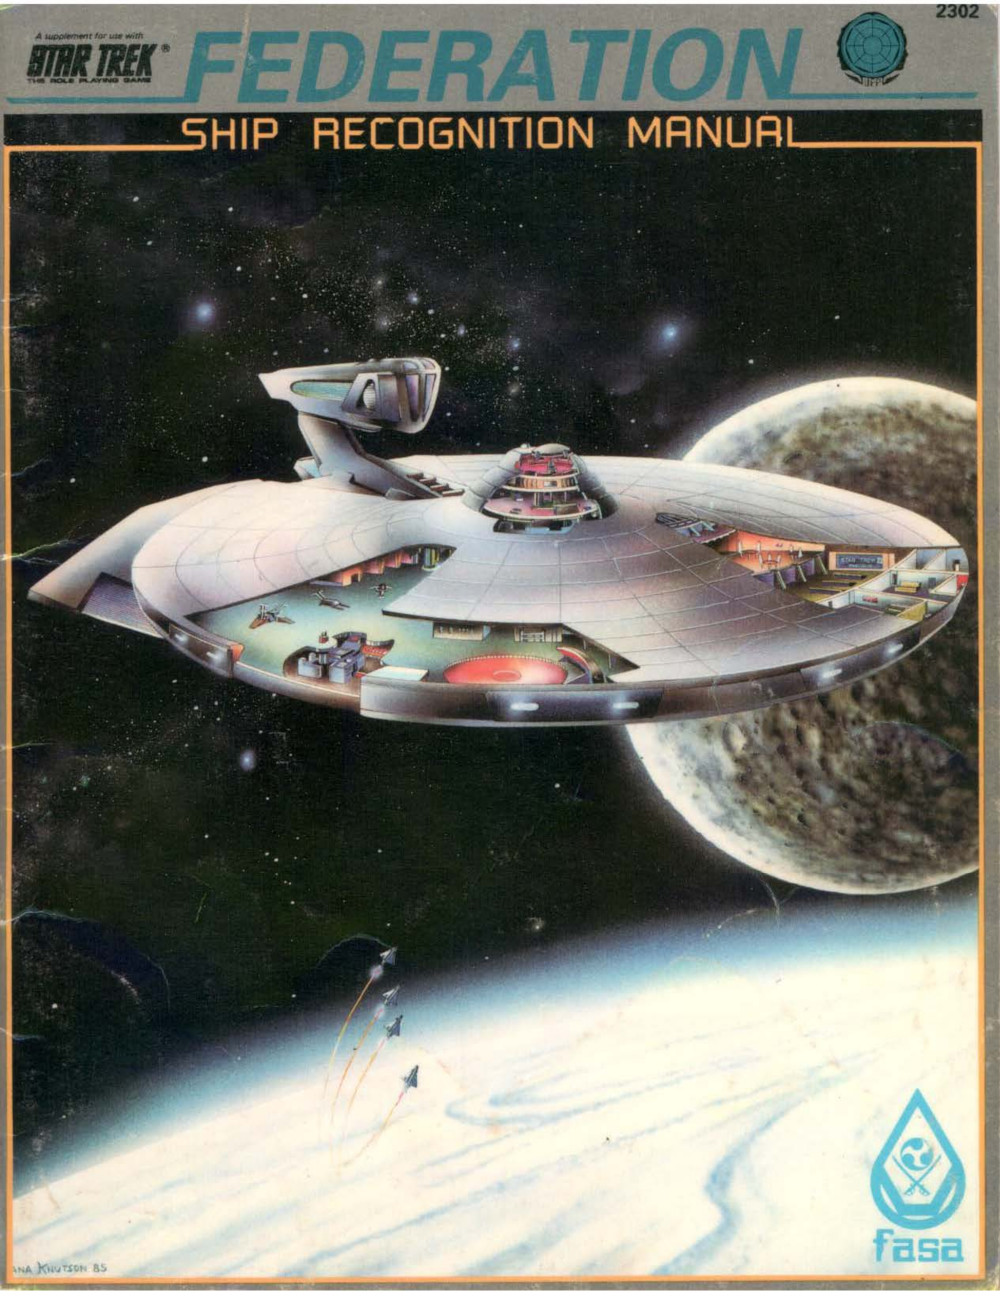 2302: Federation Ship Recognition Manual (Second Edition, 1985)